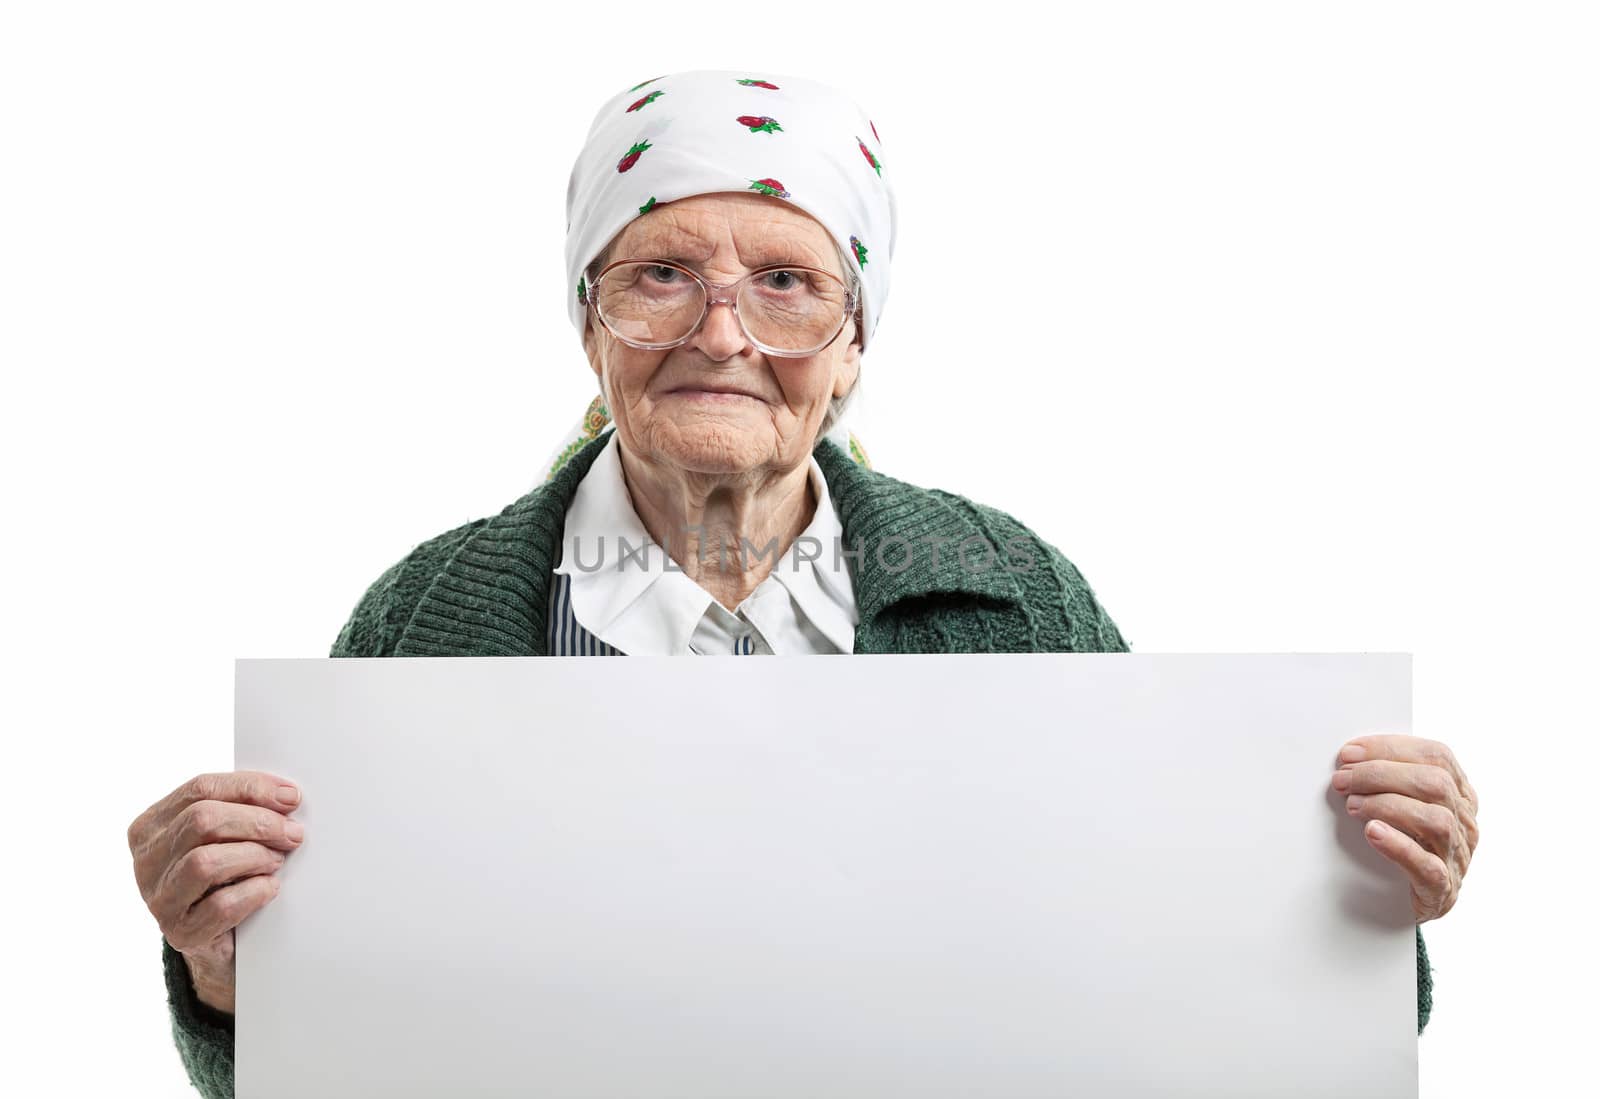 Smiling elderly lady holding blank sheet in hands by photobac